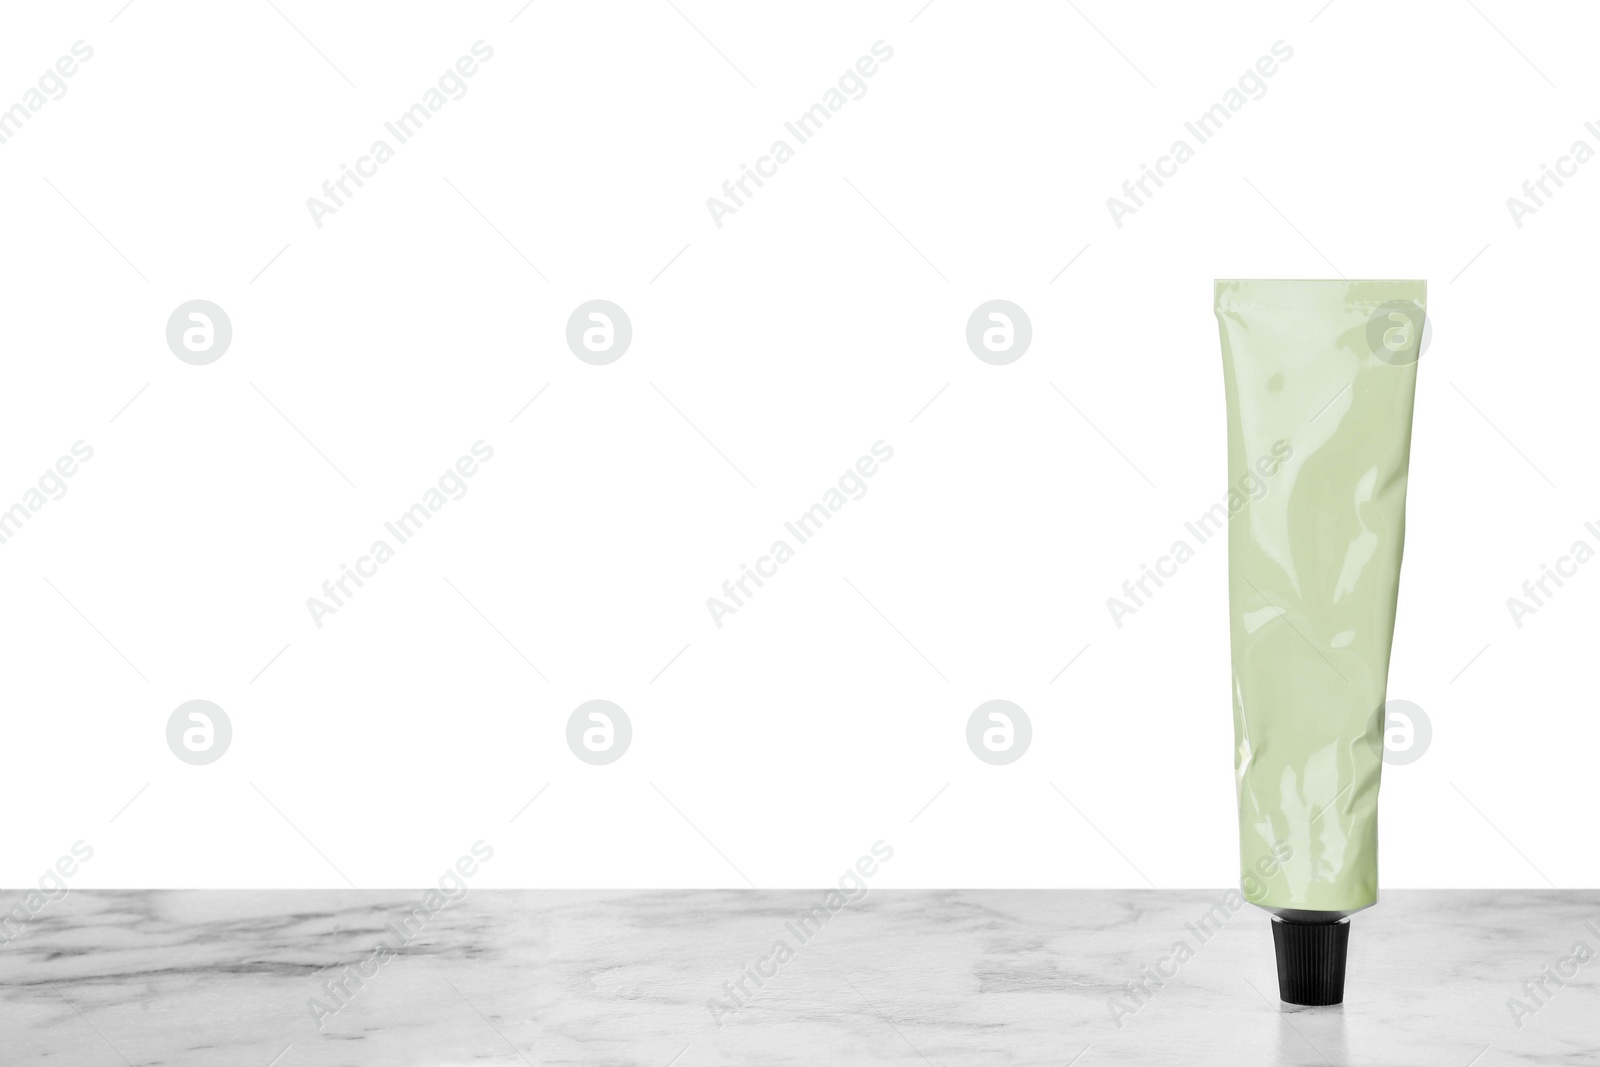 Photo of Tube of hand cream on gray table against white background